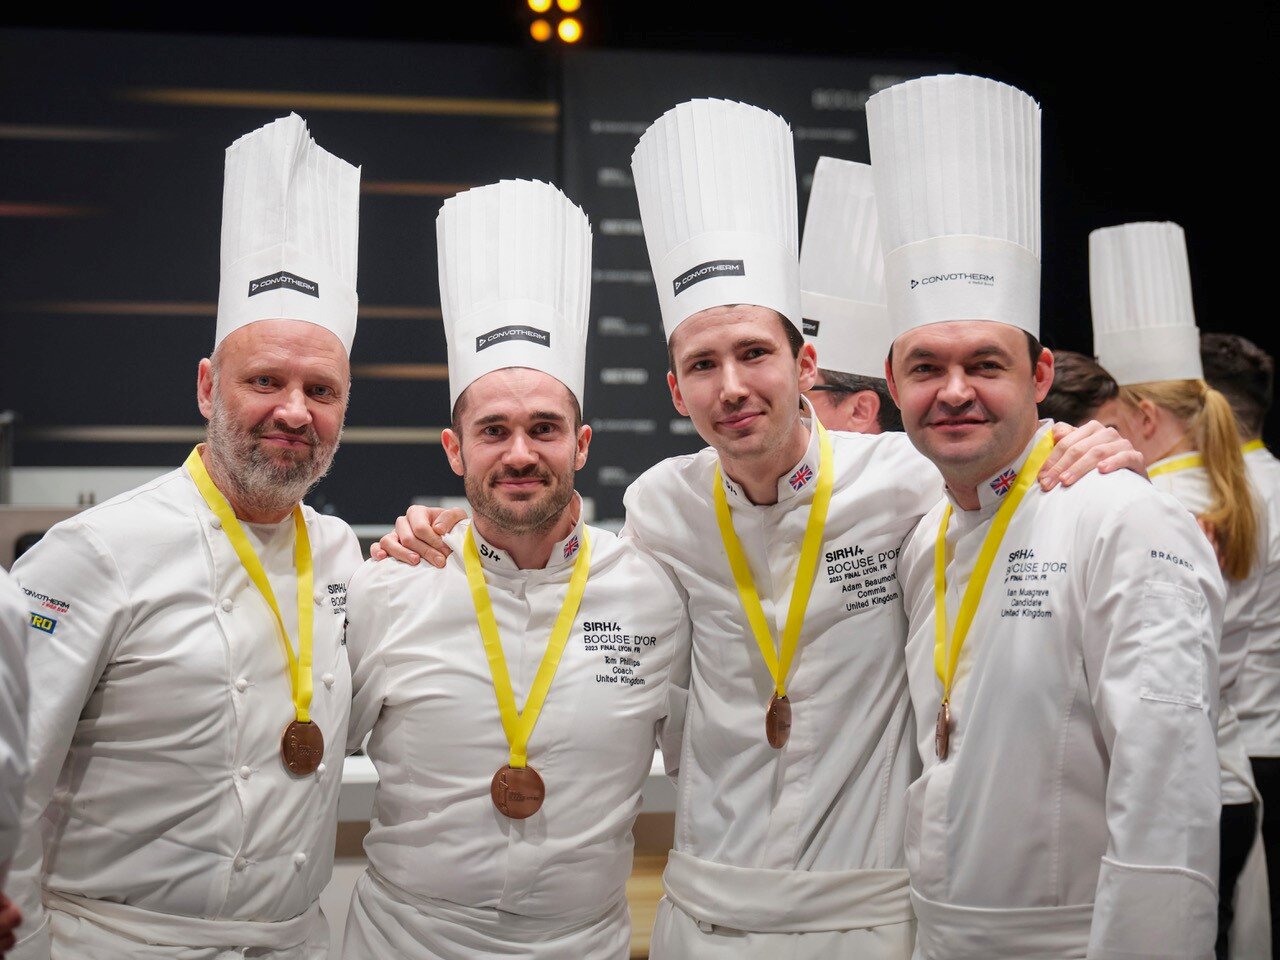 Could you represent the UK at the next Bocuse d’Or competition?